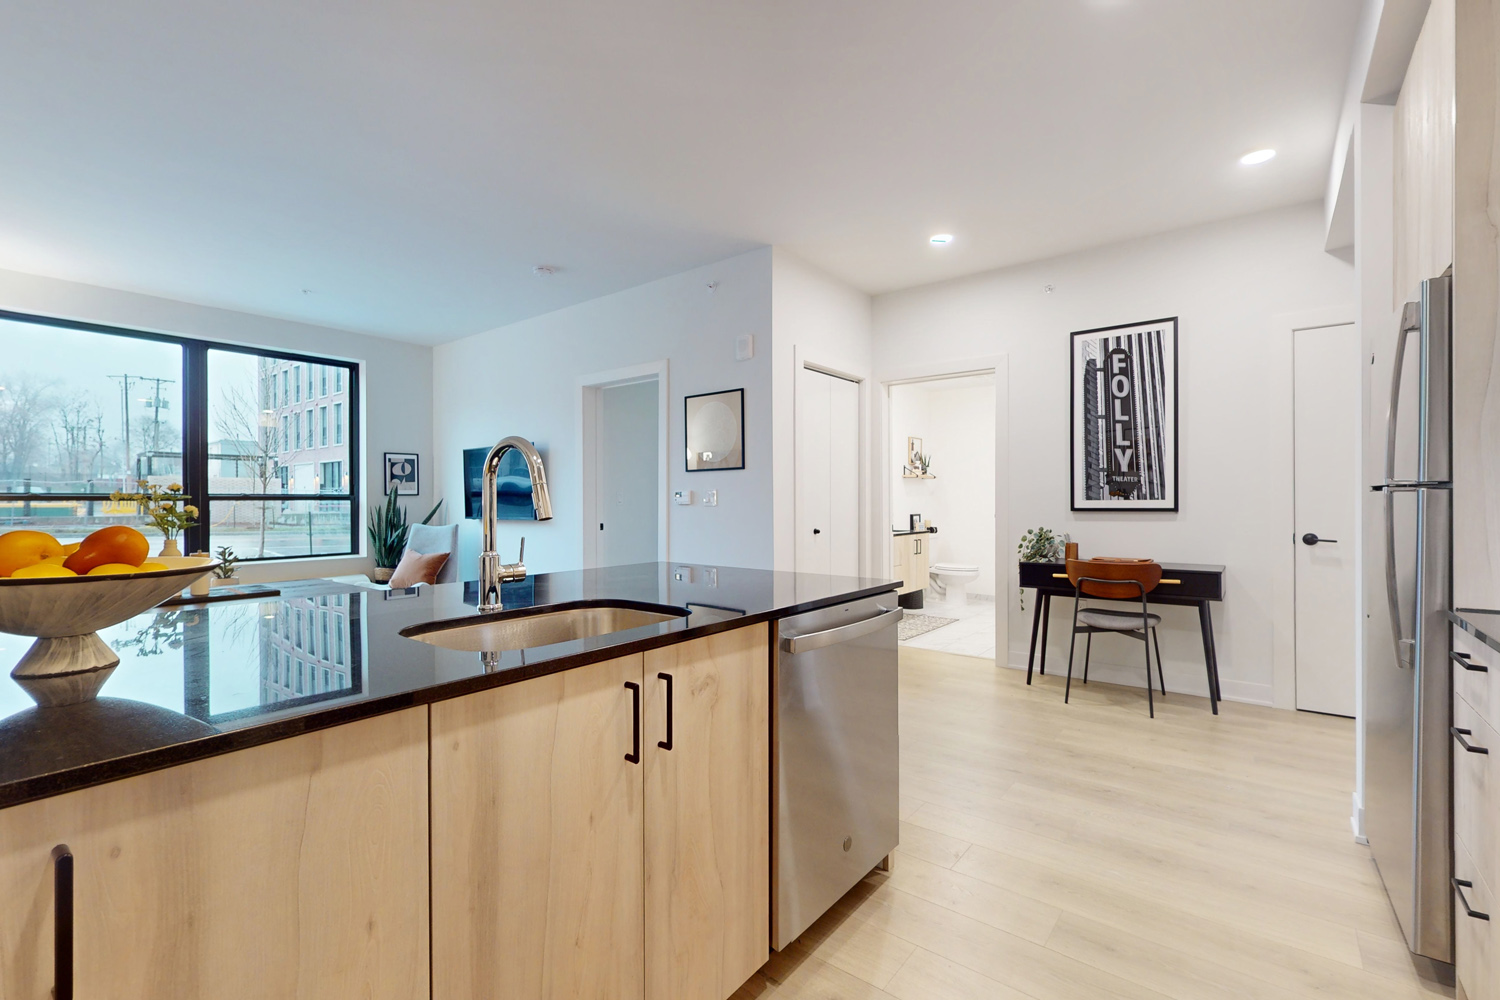 Apartments with Kitchen Island and Quartz Countertops at the Senate Apartments at the Crosswalks